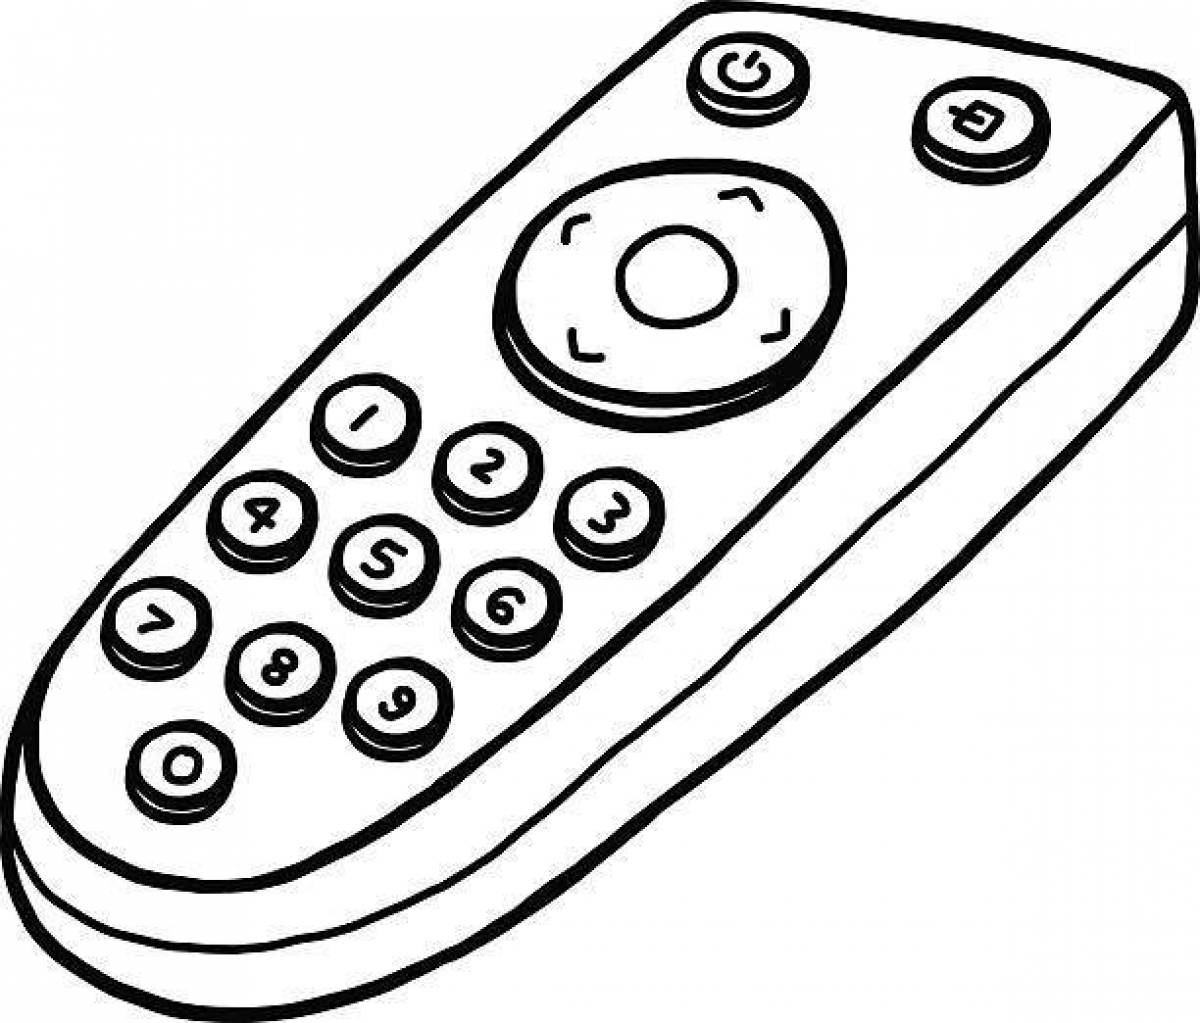 Colorful remote control coloring page